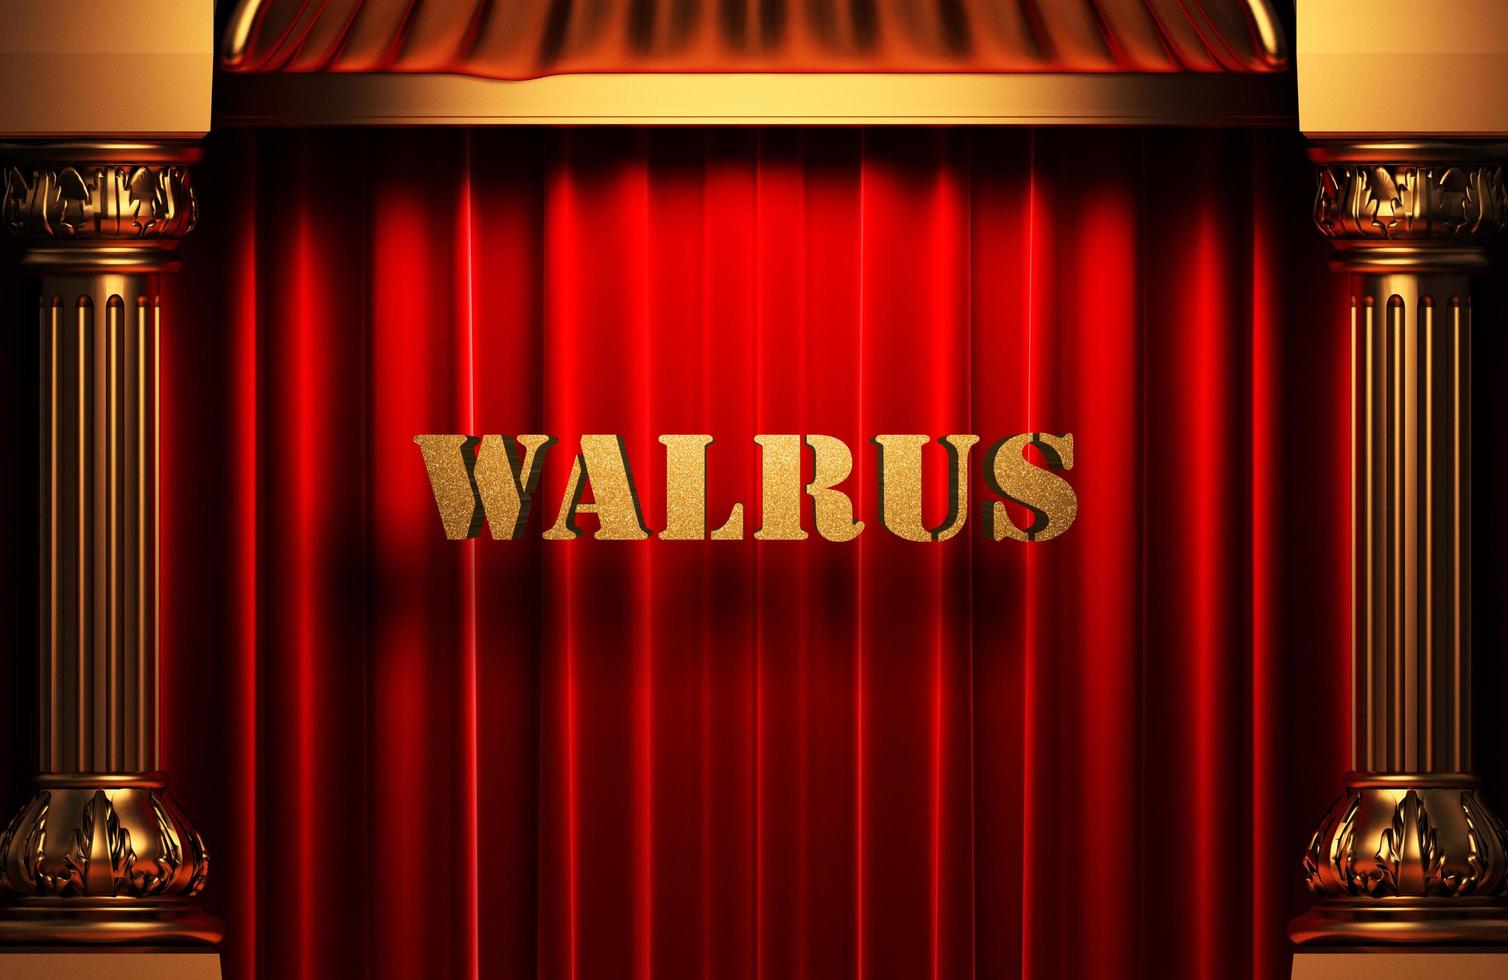 walrus golden word on red curtain photo